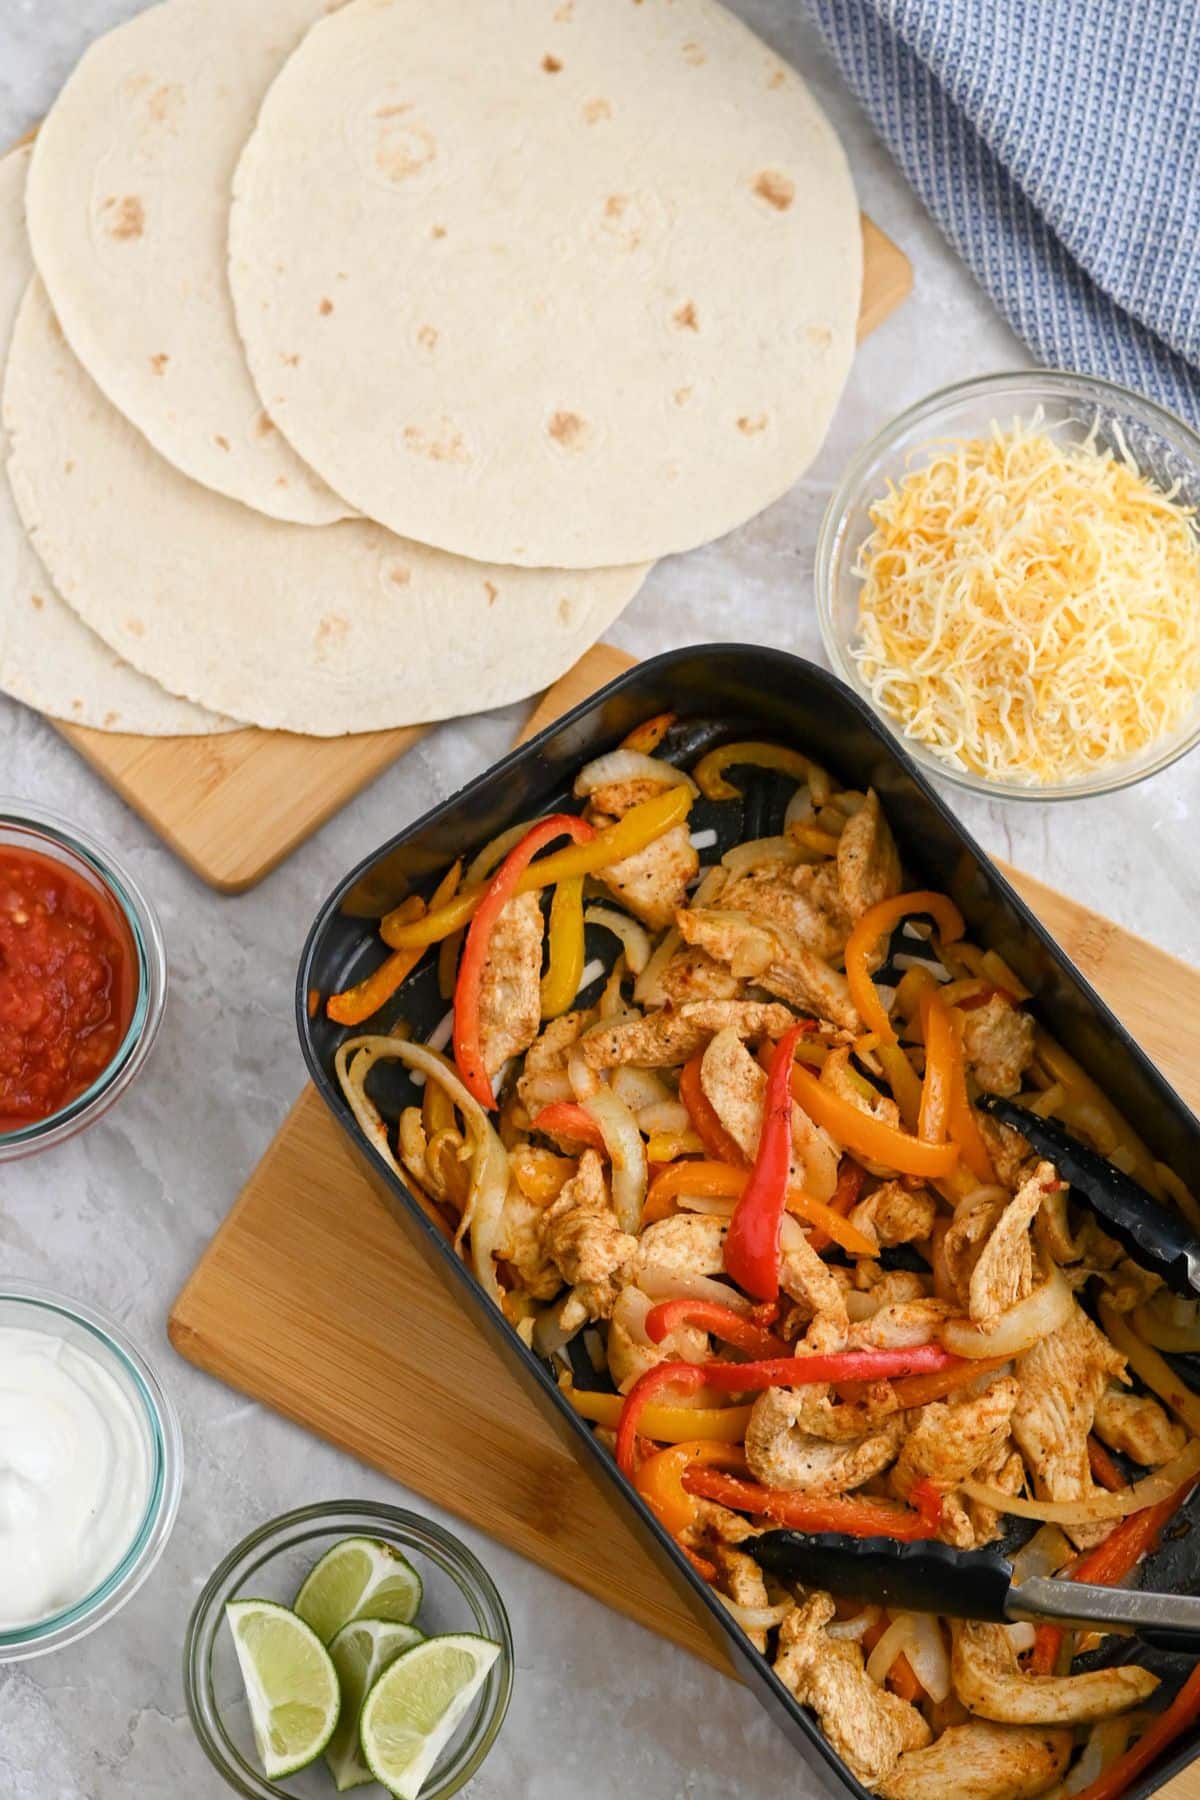 A top view of a chicken fajita mix with sliced bell peppers and onions in a black dish, surrounded by tortillas, shredded cheese, salsa, and lime on a marble countertop.